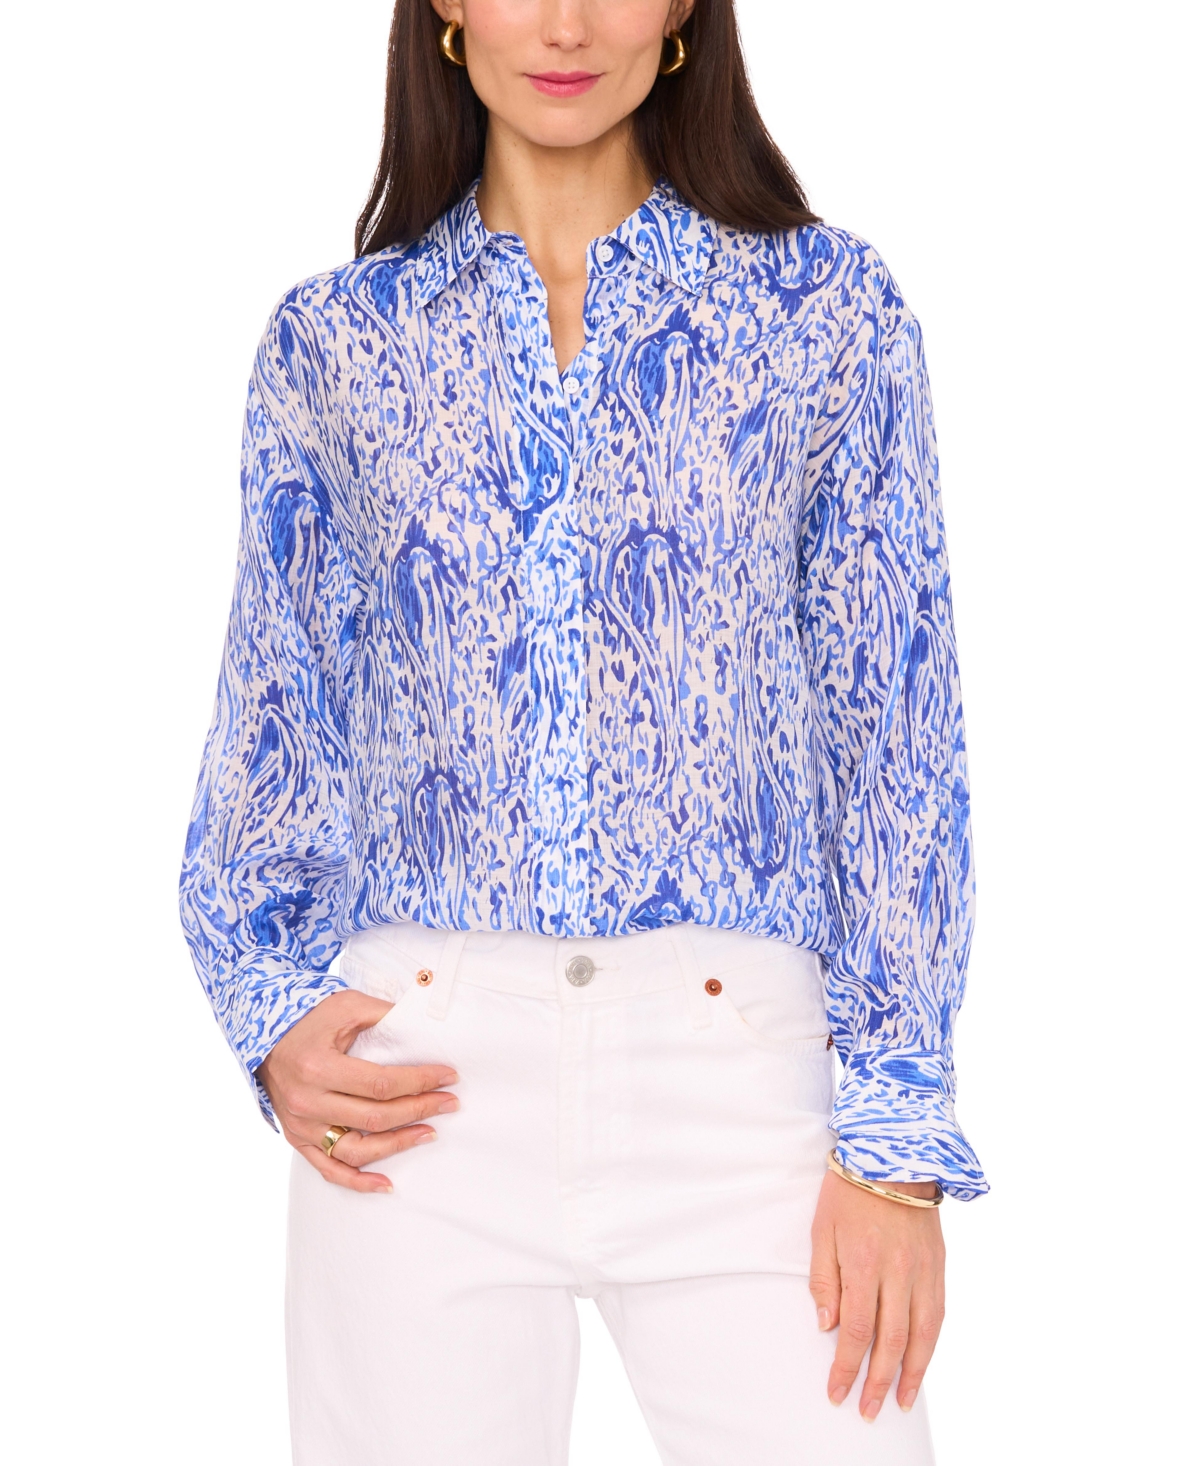 Women's Printed Button-Front Top - Blue Paisley